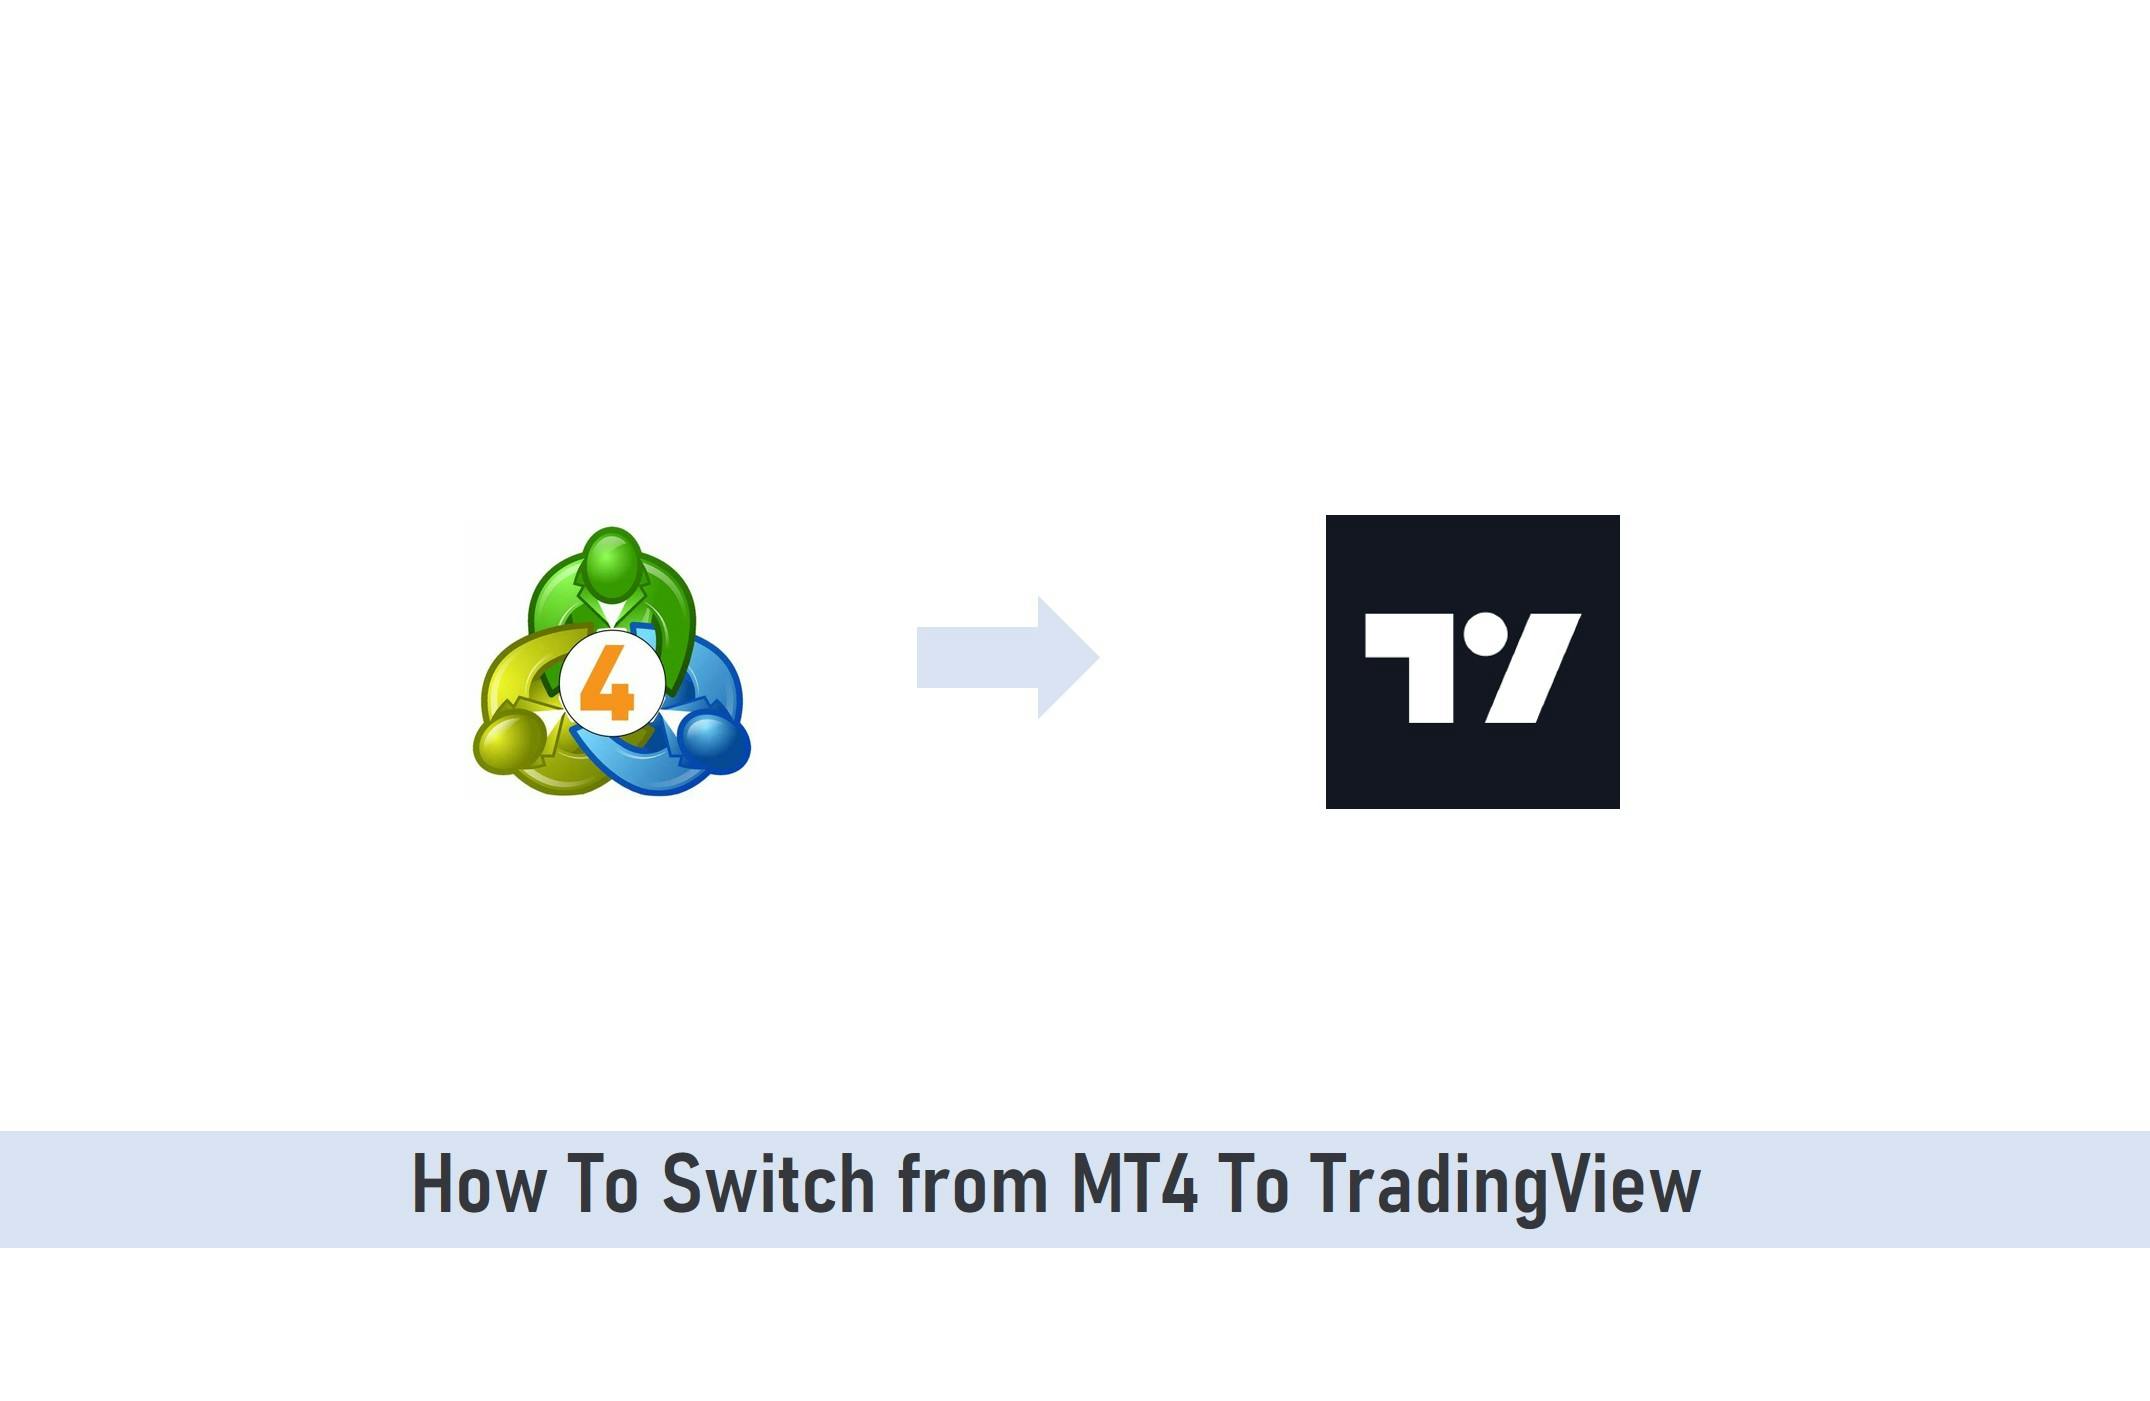 How To Switch from MT4 To TradingView